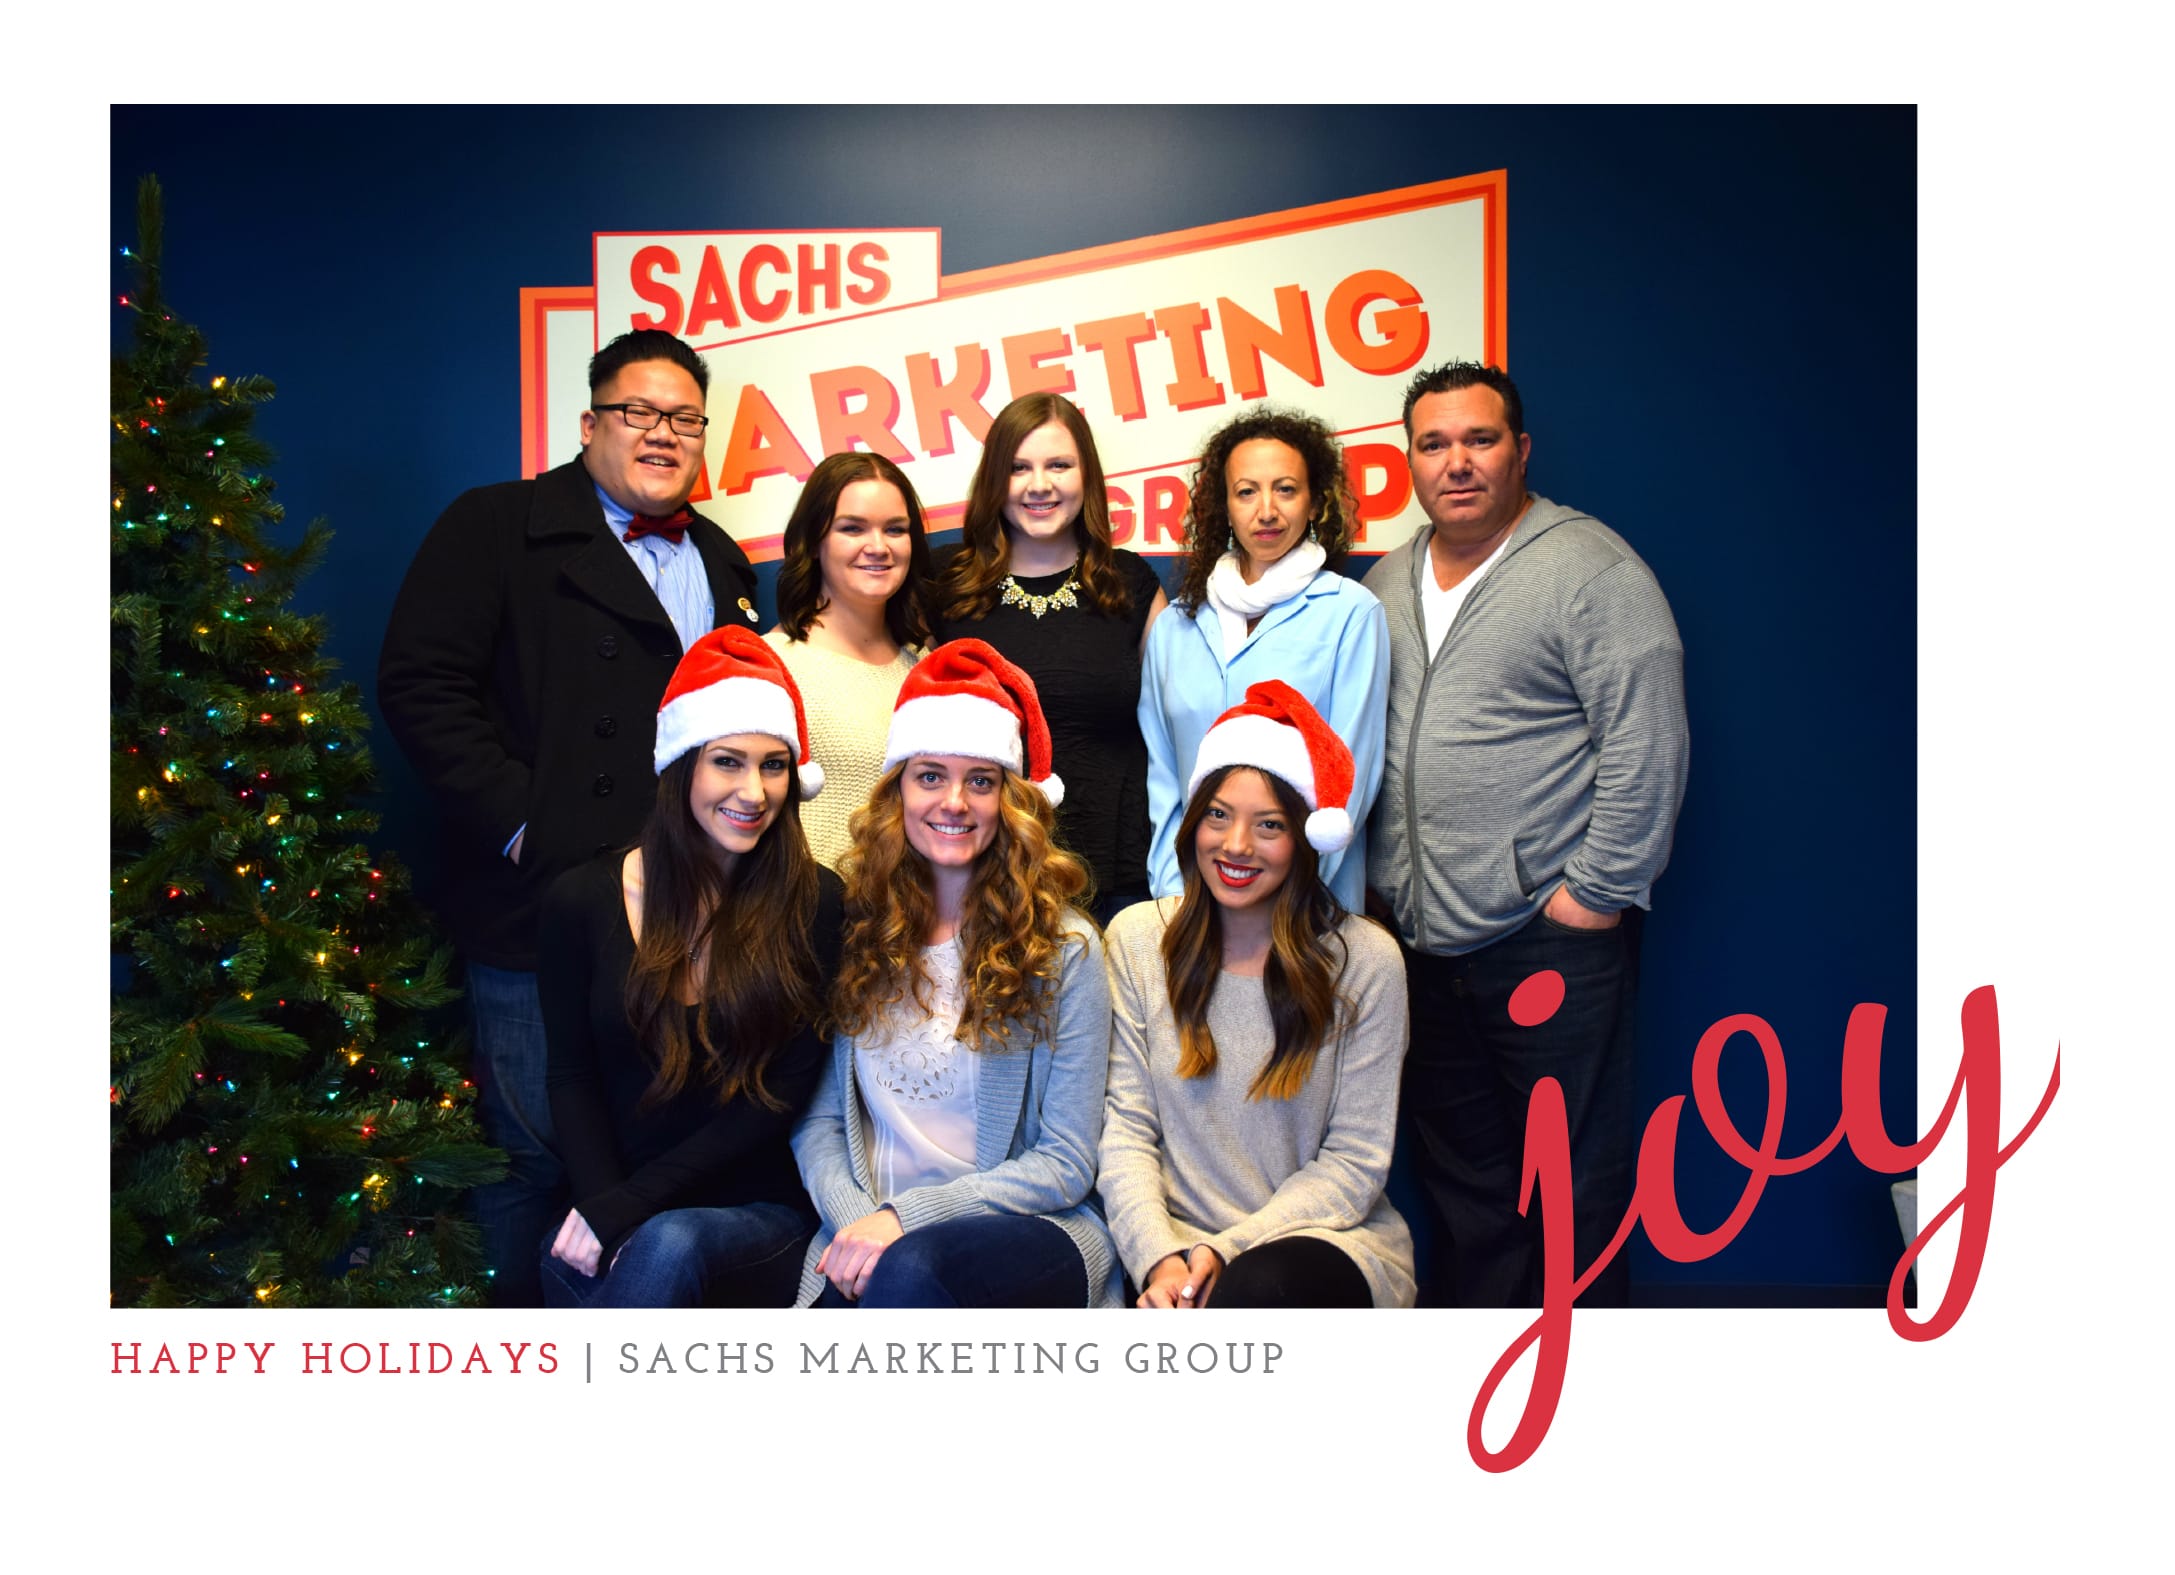 Happy Holidays from Sachs Marketing Group! | Sachs Marketing Group